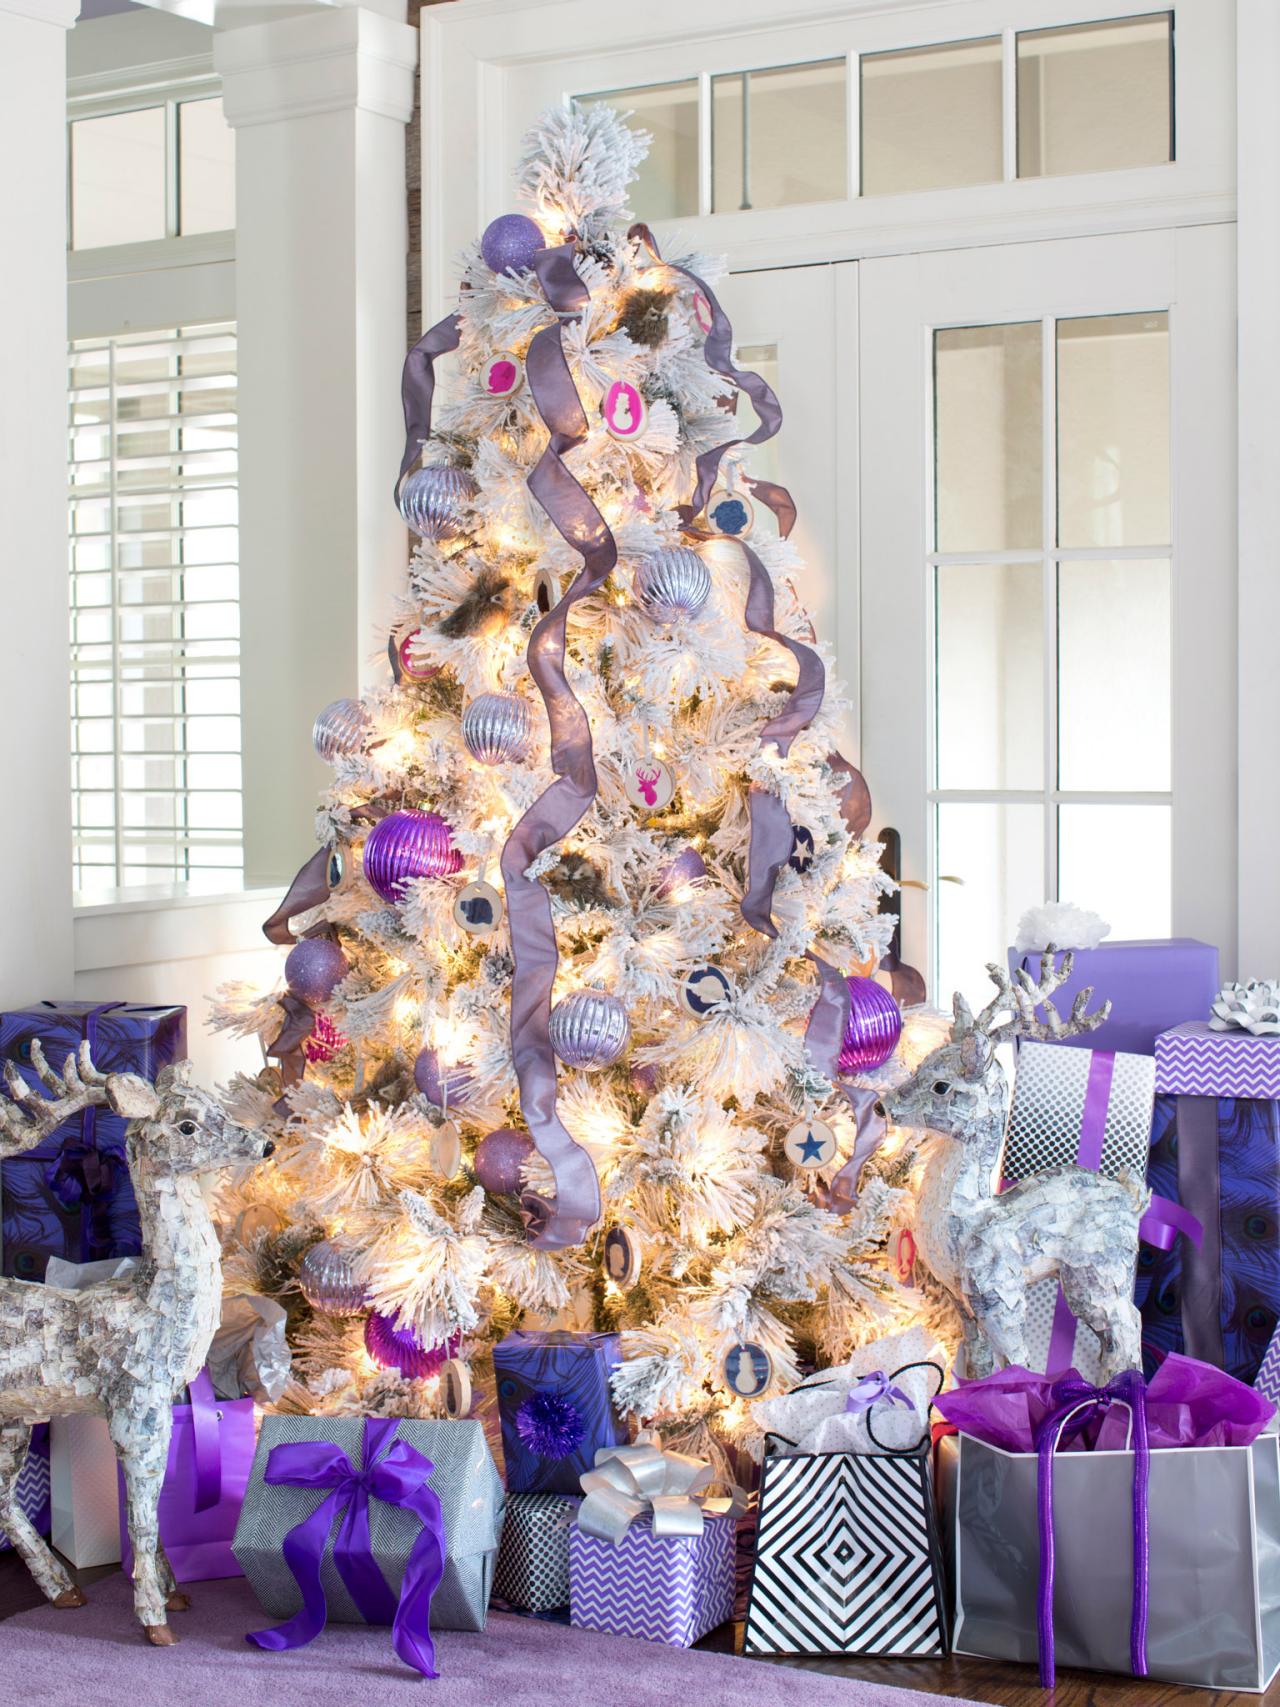 Non-Traditional Holiday Color Palettes | HGTV's Decorating & Design Blog | HGTV